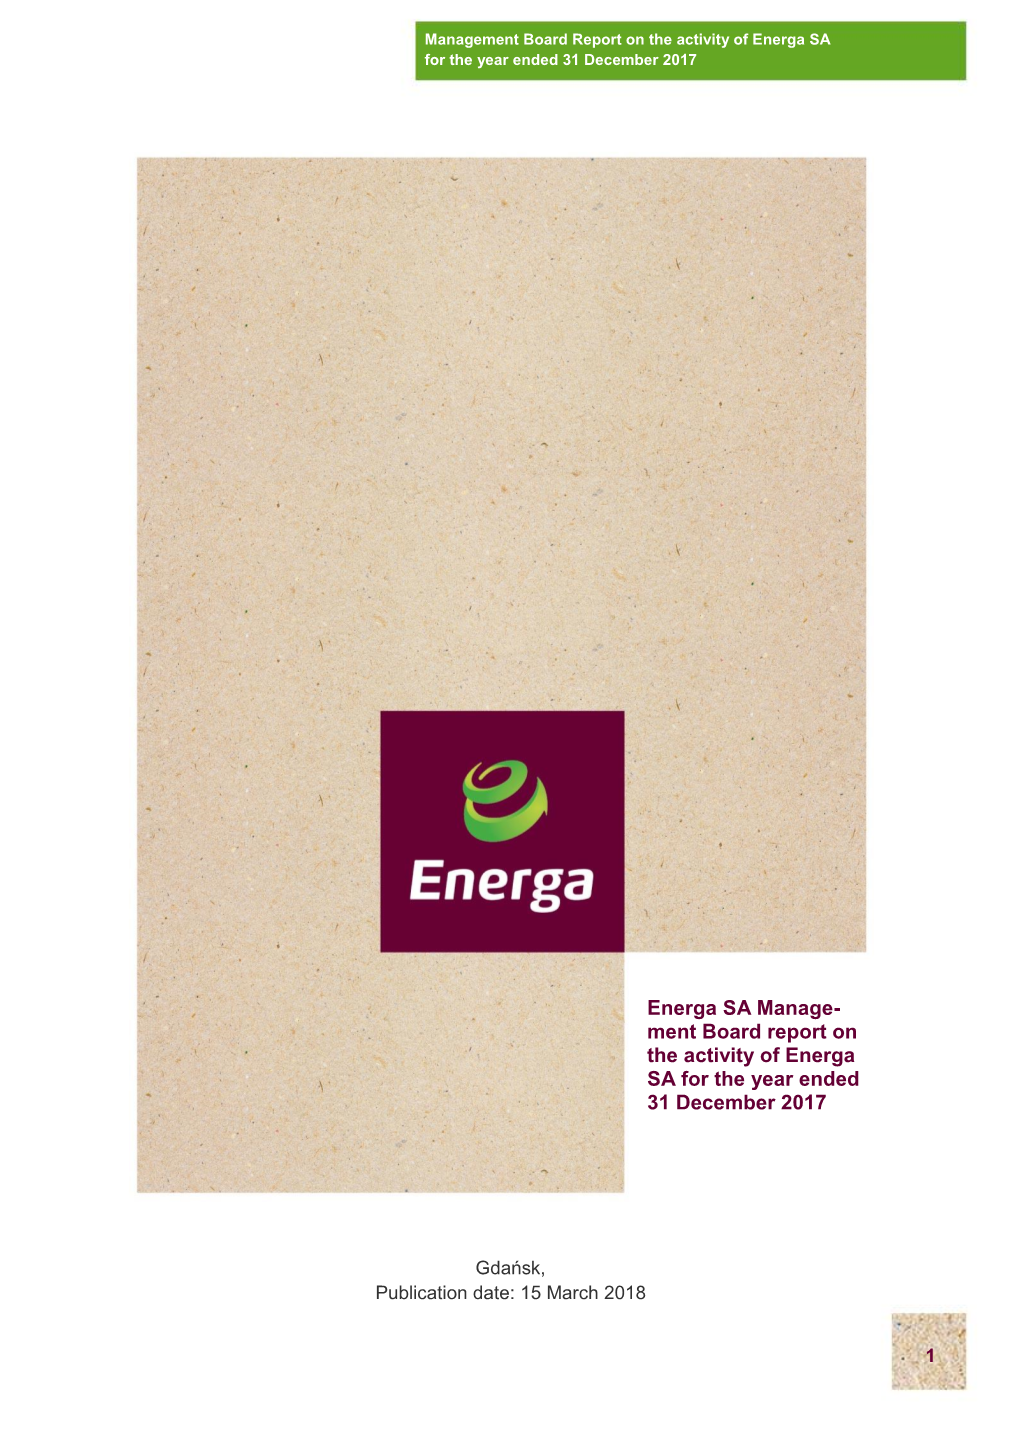 Energa SA Manage- Ment Board Report on the Activity of Energa SA for the Year Ended 31 December 2017